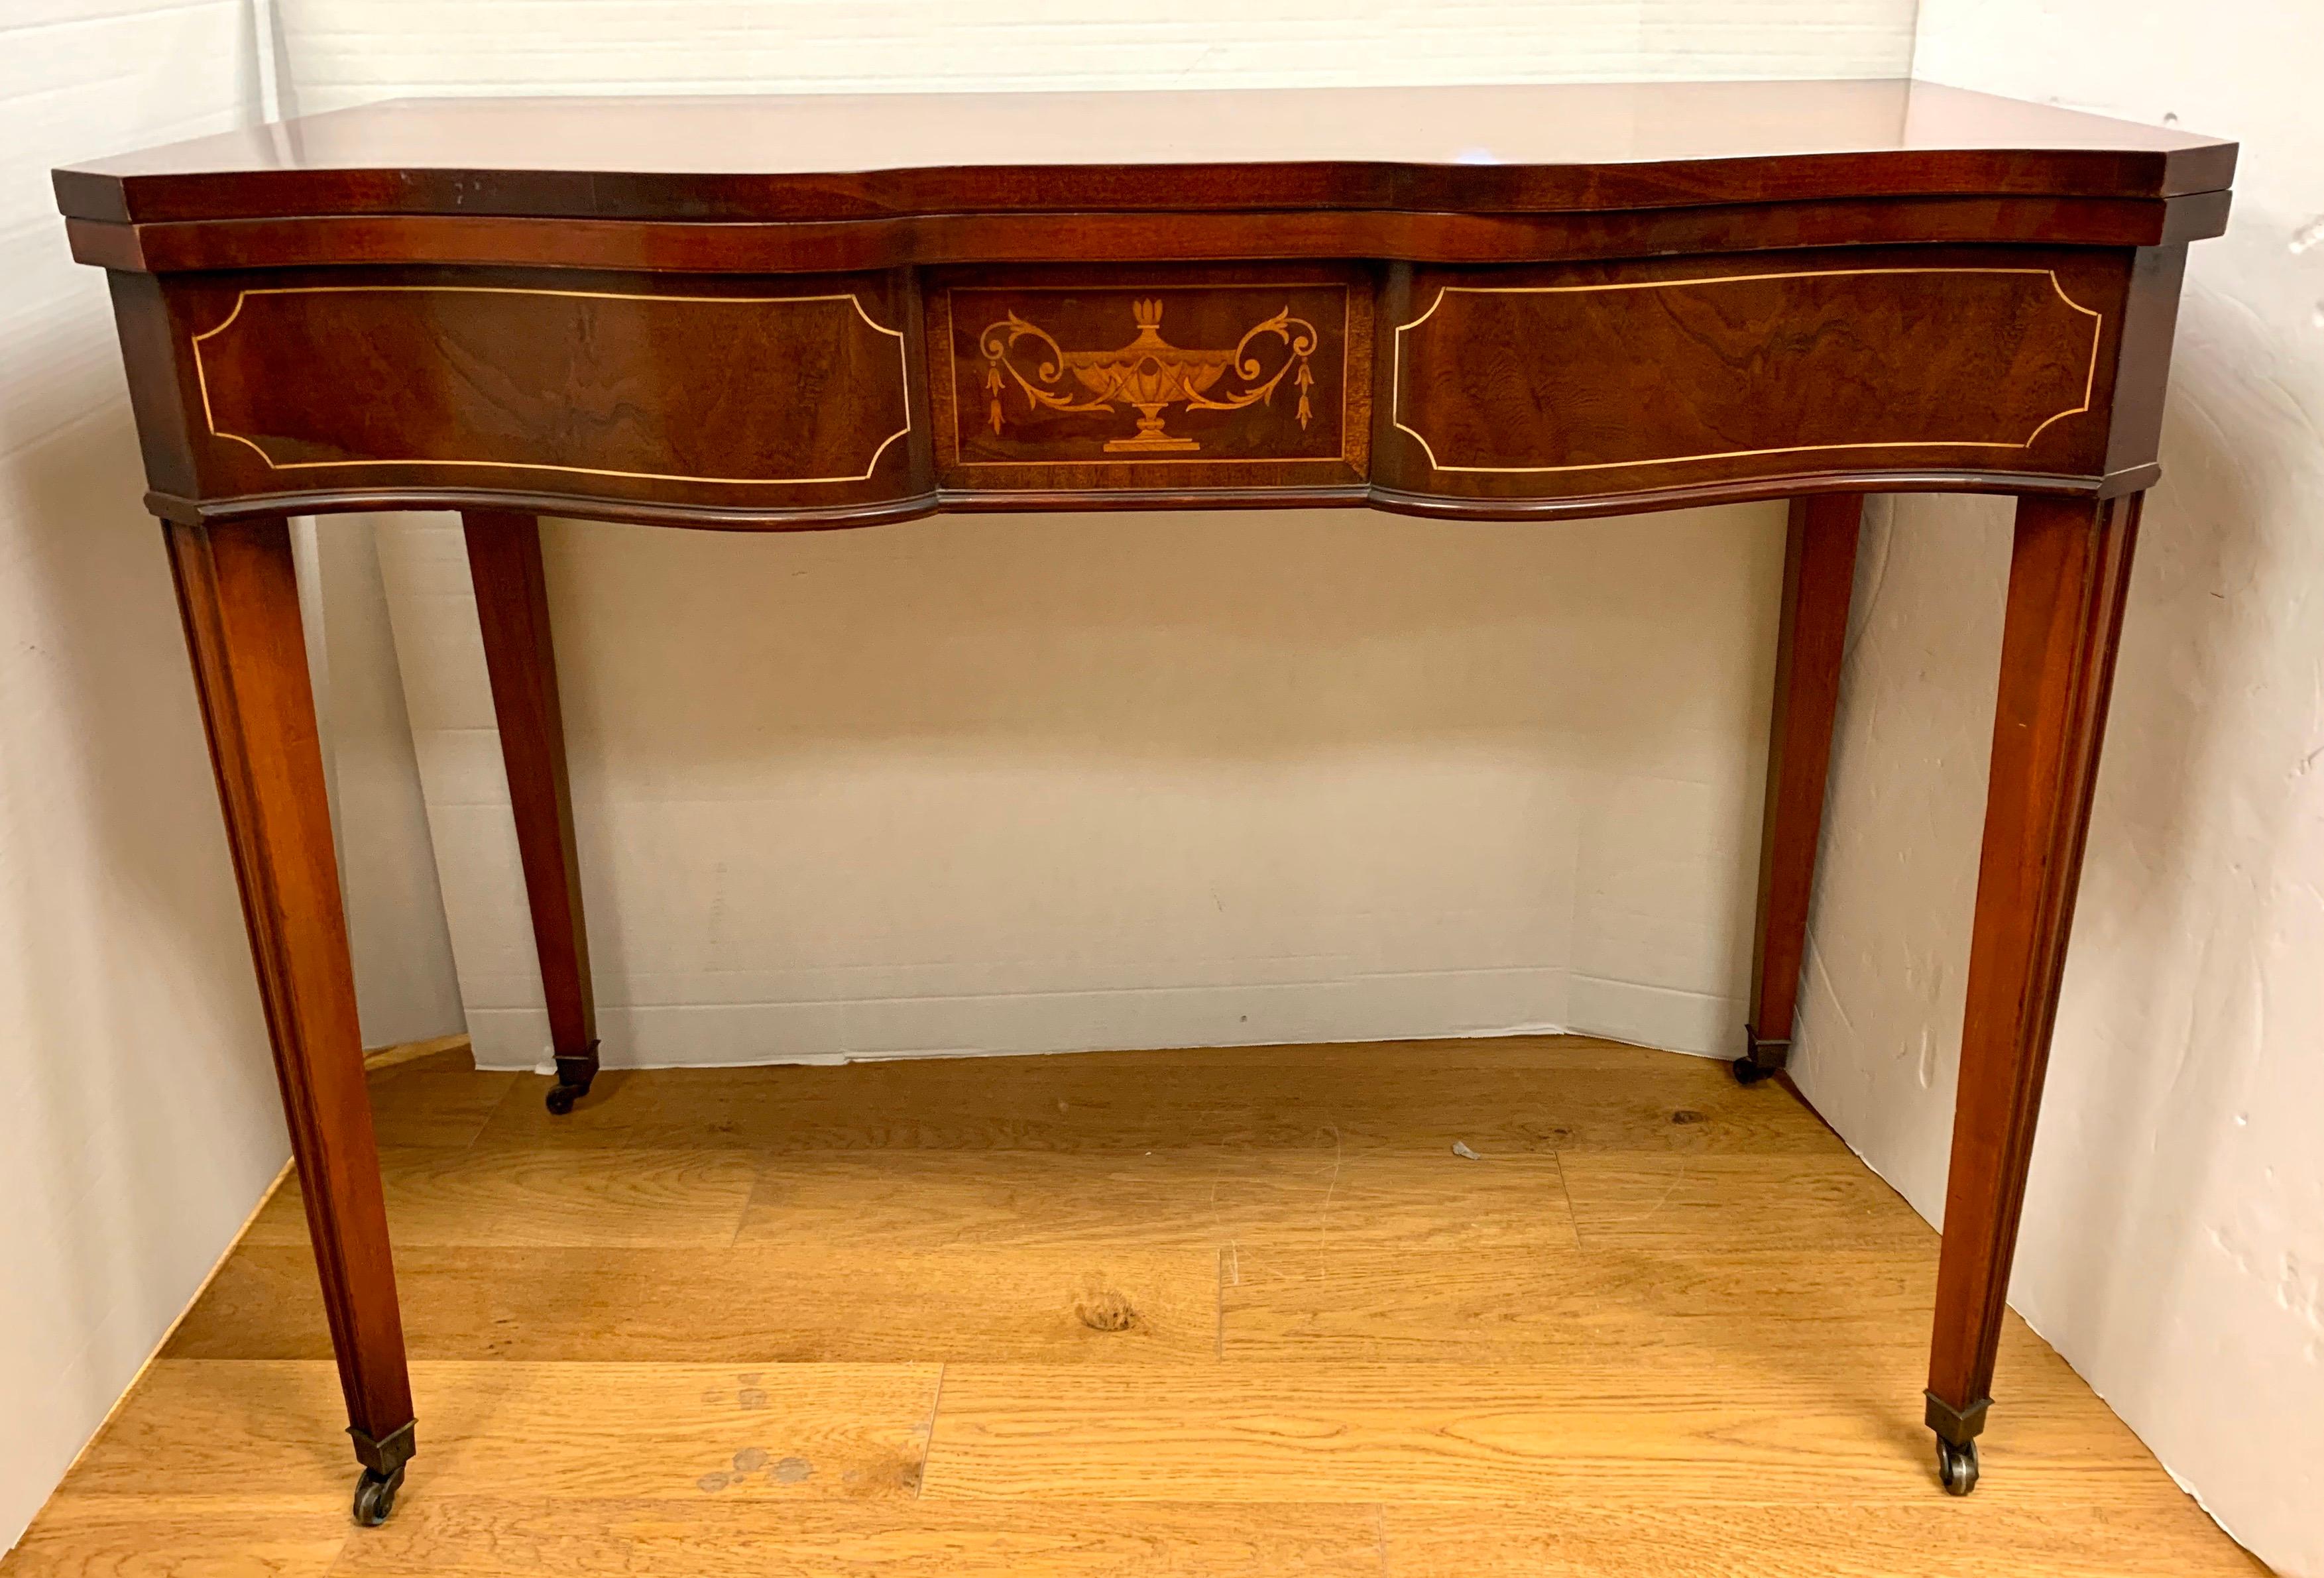 Elegant mahogany game table with gorgeous urn and line inlay on its shaped front. 
Extraordinary craftsmanship, circa 1920s, France. Table flips open to expand to a square game table or breakfast table. The table rests on tapered legs with brass